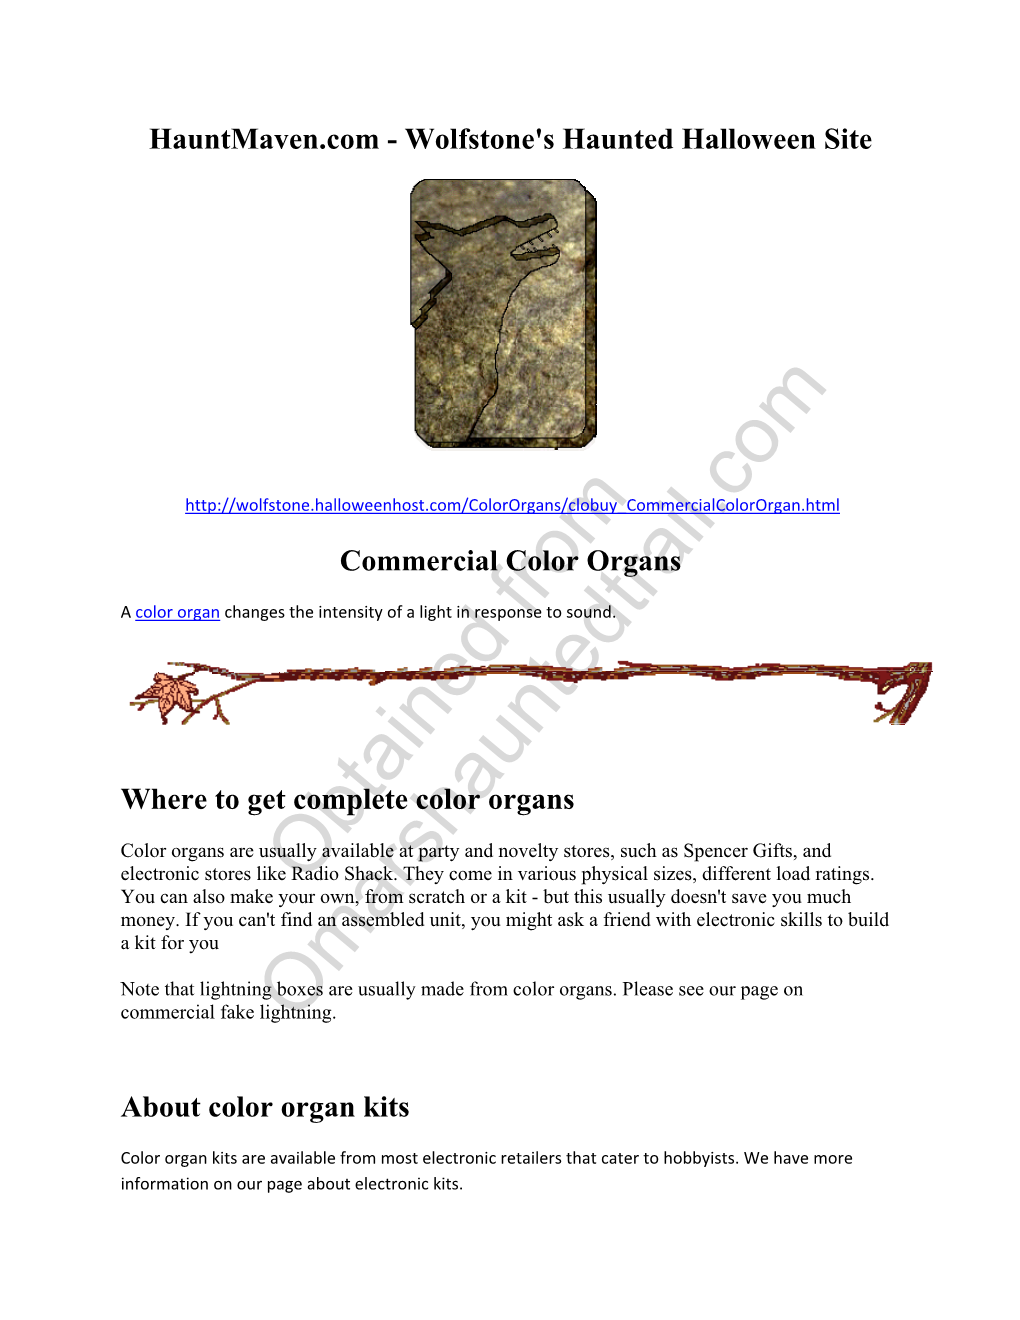 About Color Organ Kits